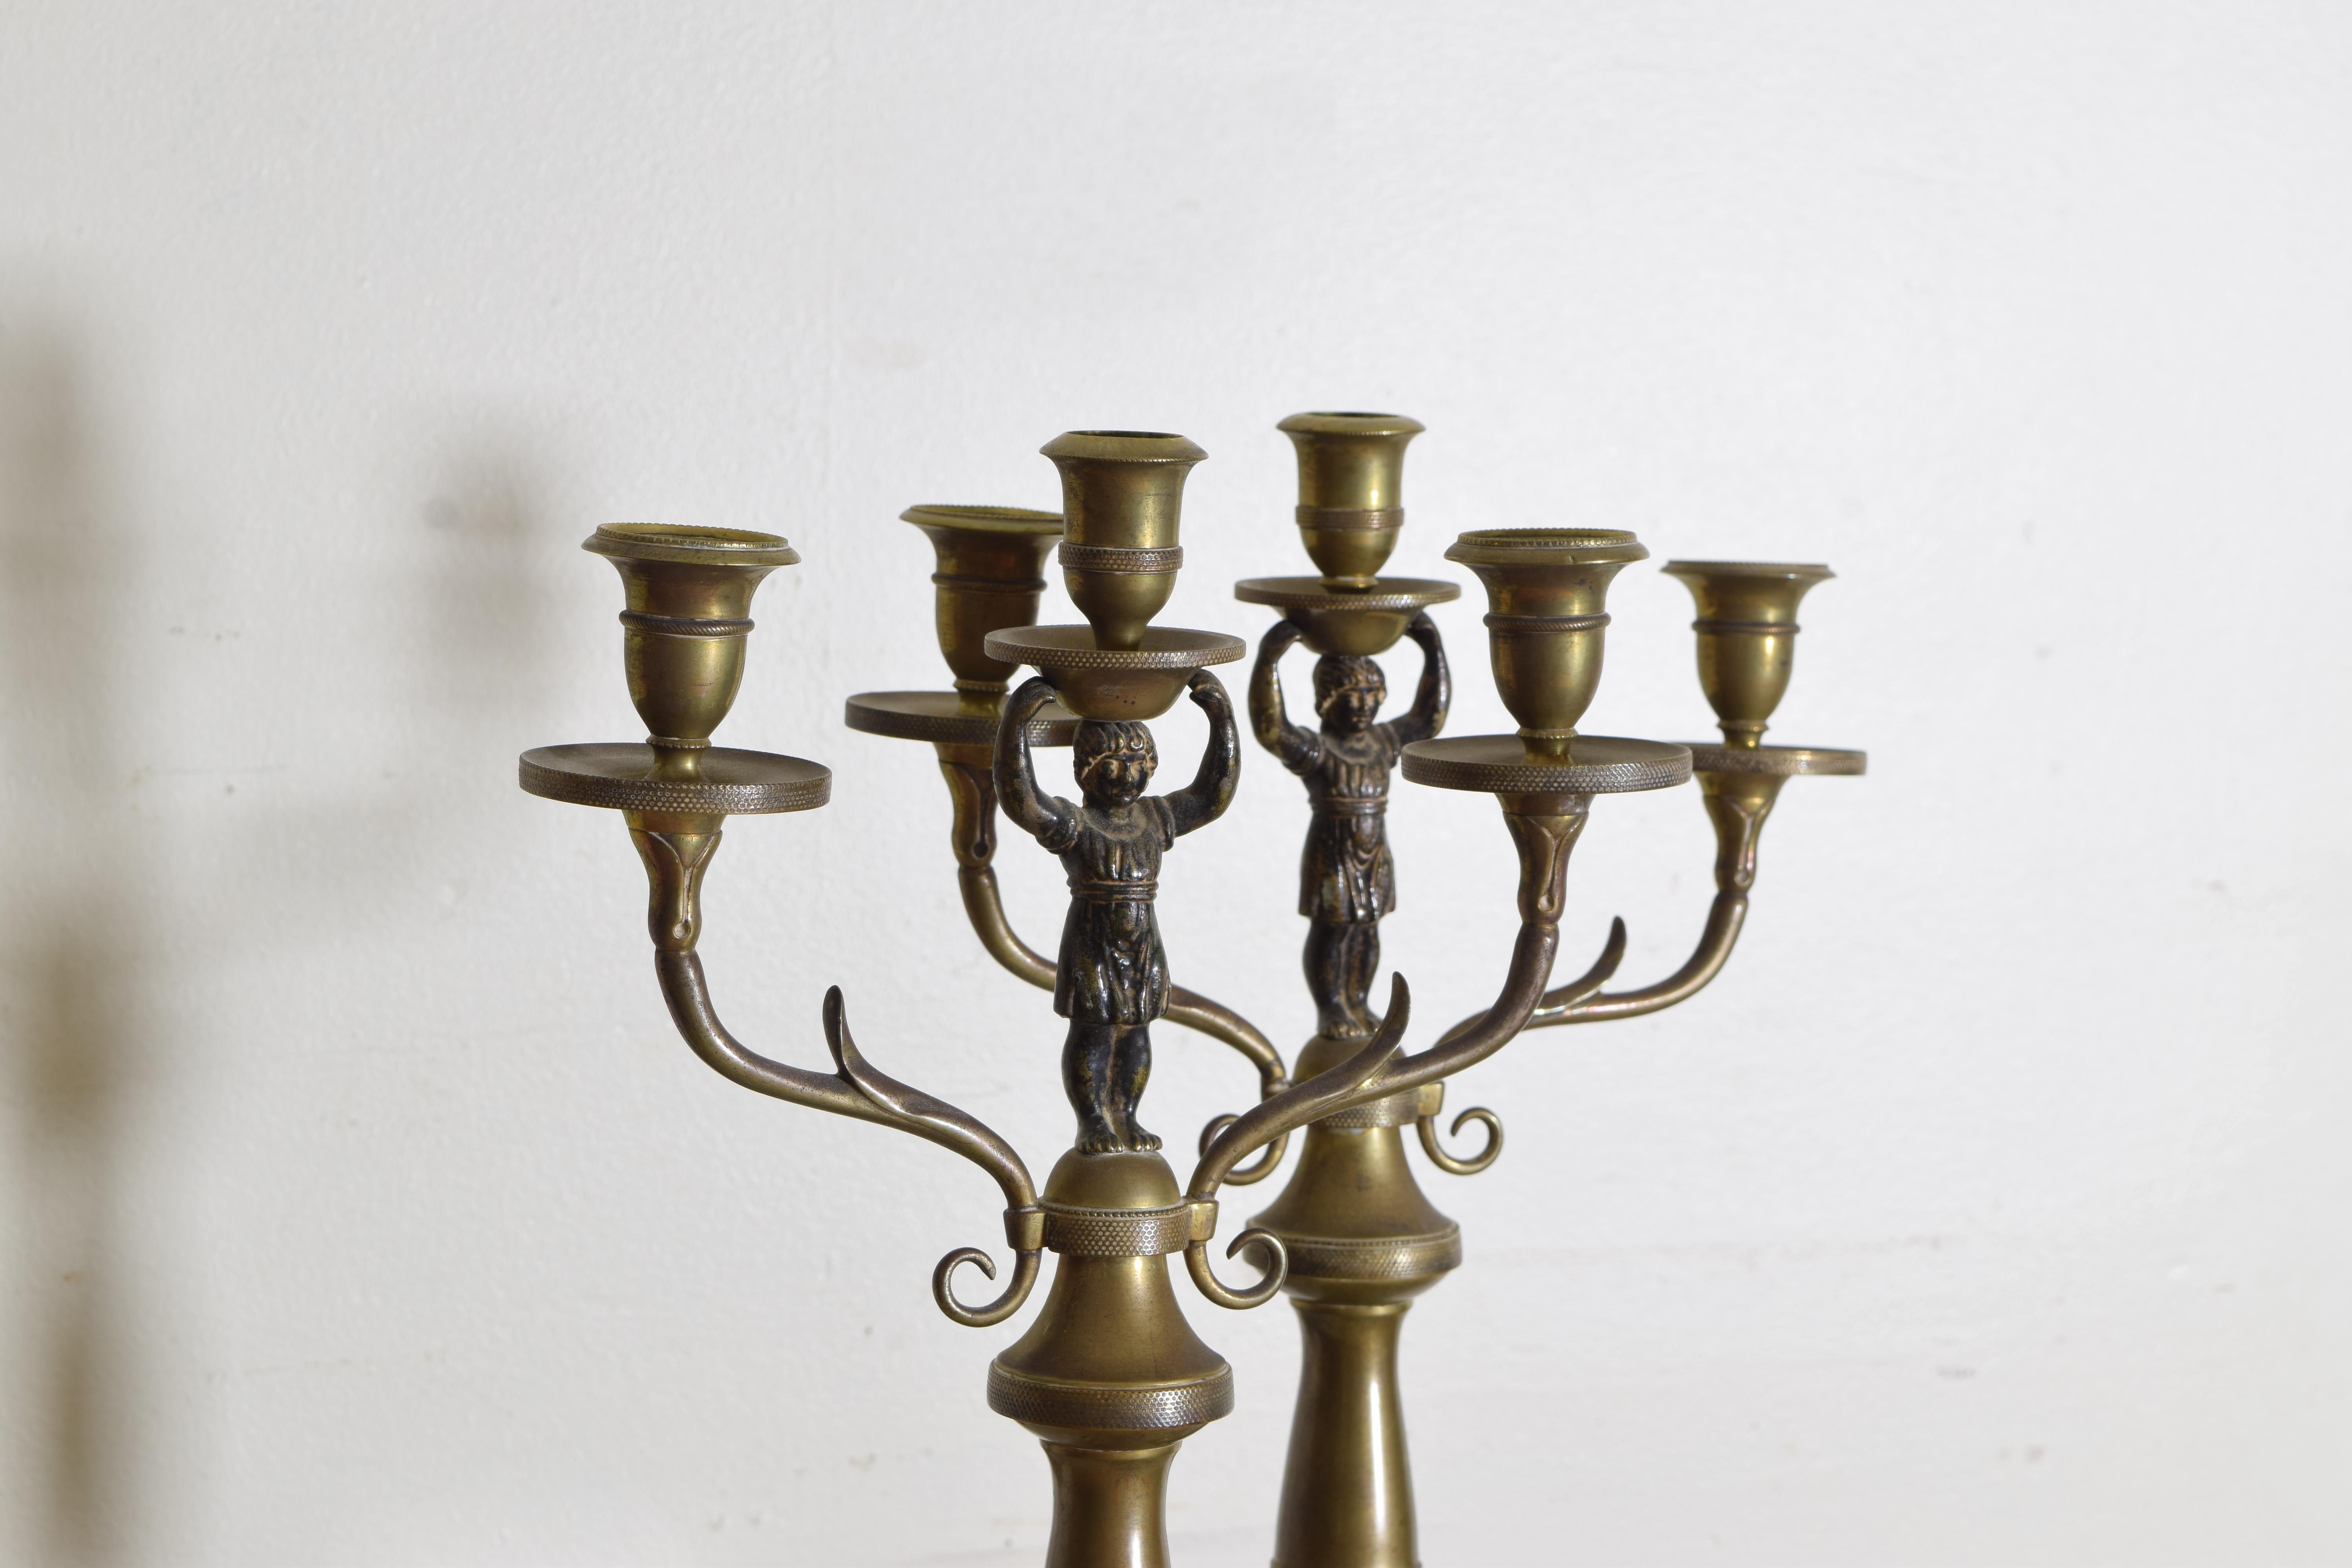 Pair Italian Empire Period Brass 3-Light Figural Candelabras, Early 19th Century For Sale 1